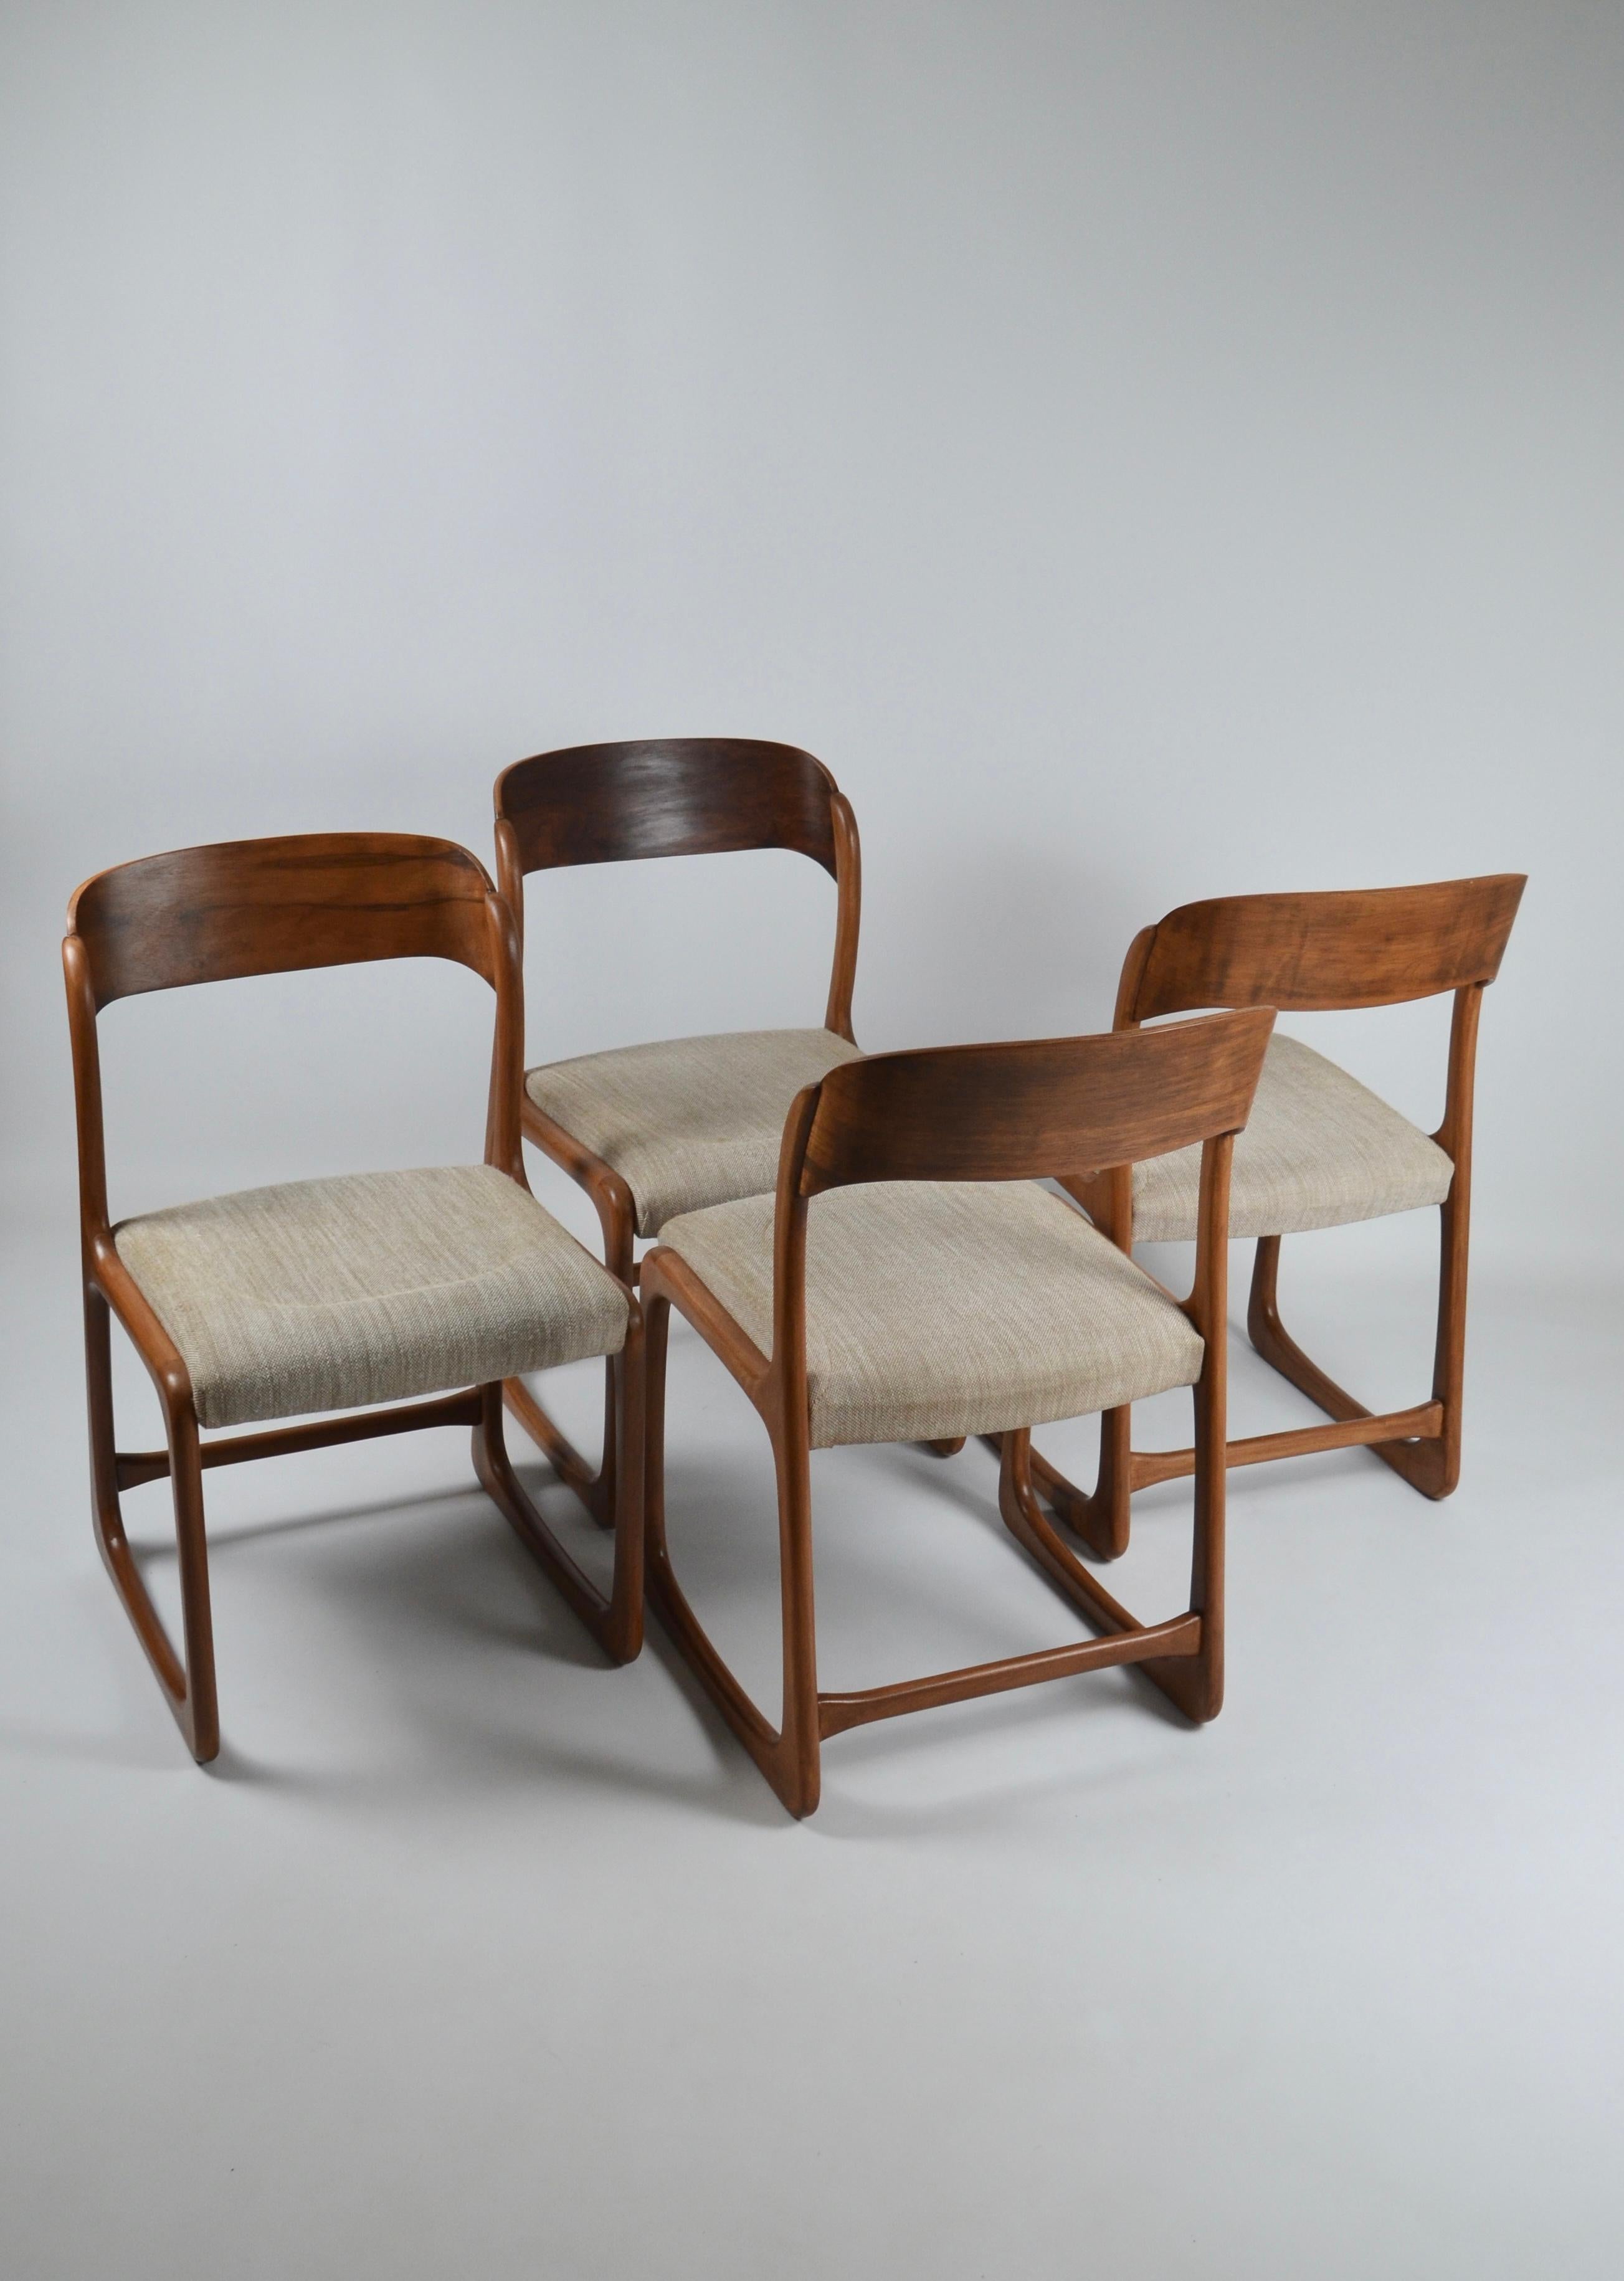 Vintage French Traineau or Sleigh Dining Chairs, Baumann, France, 60s For Sale 1